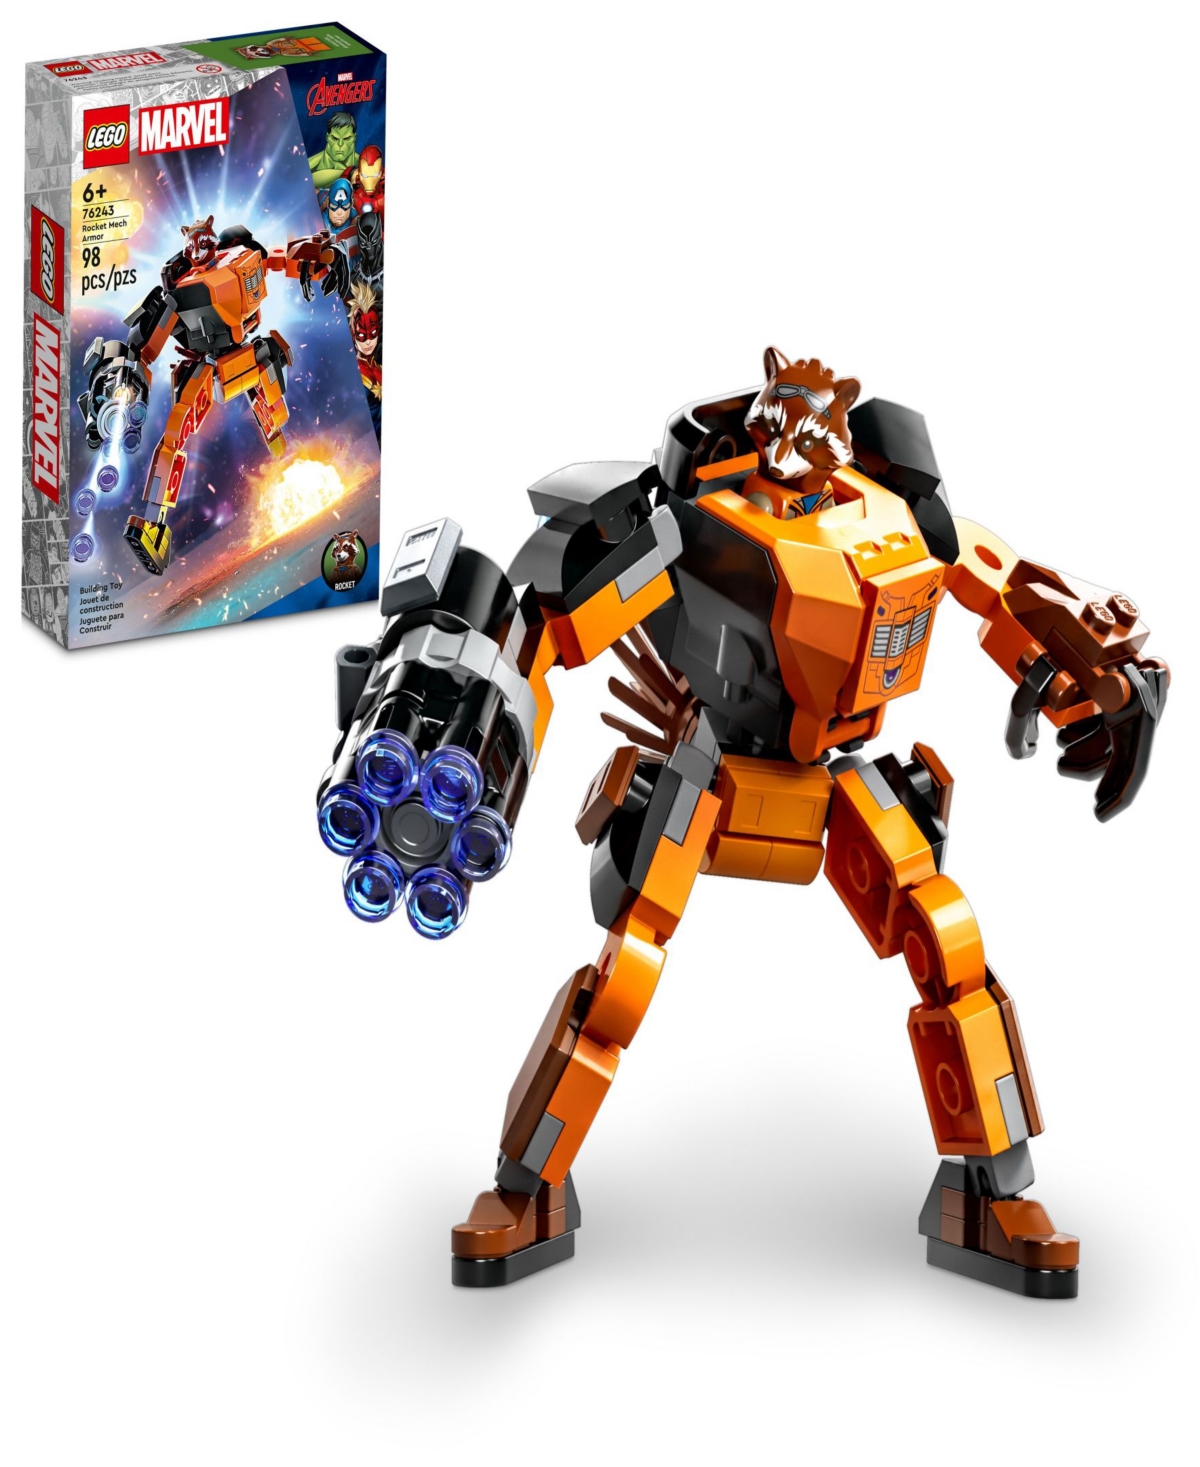 Lego Kids' Super Heroes Marvel Rocket Mech Armor 76243 Toy Building Set With Rocket Racoon Minifigure In Multicolor